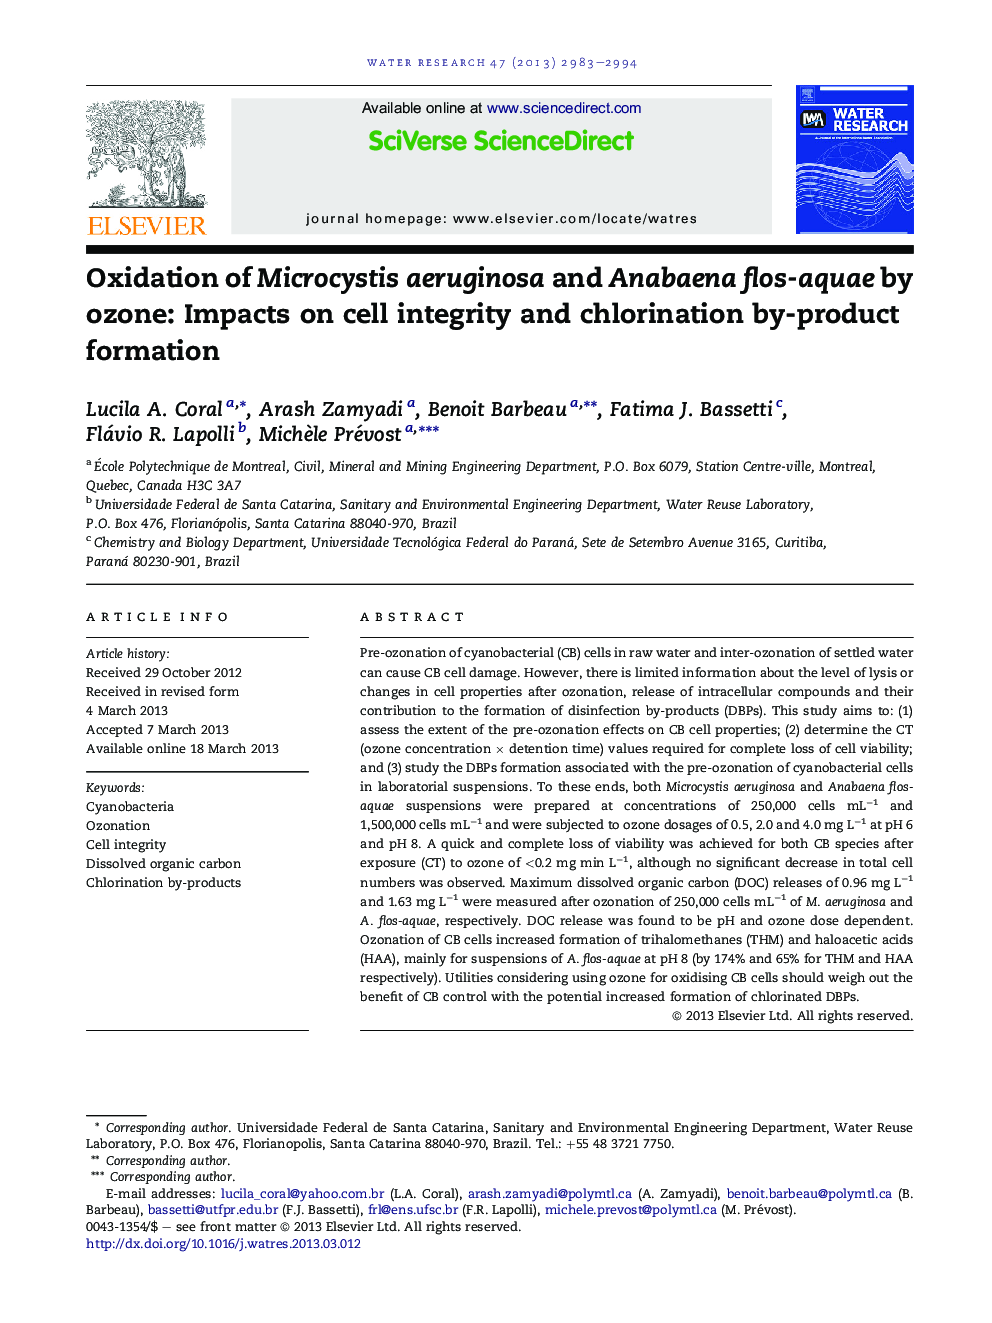 Oxidation of Microcystis aeruginosa and Anabaena flos-aquae by ozone: Impacts on cell integrity and chlorination by-product formation